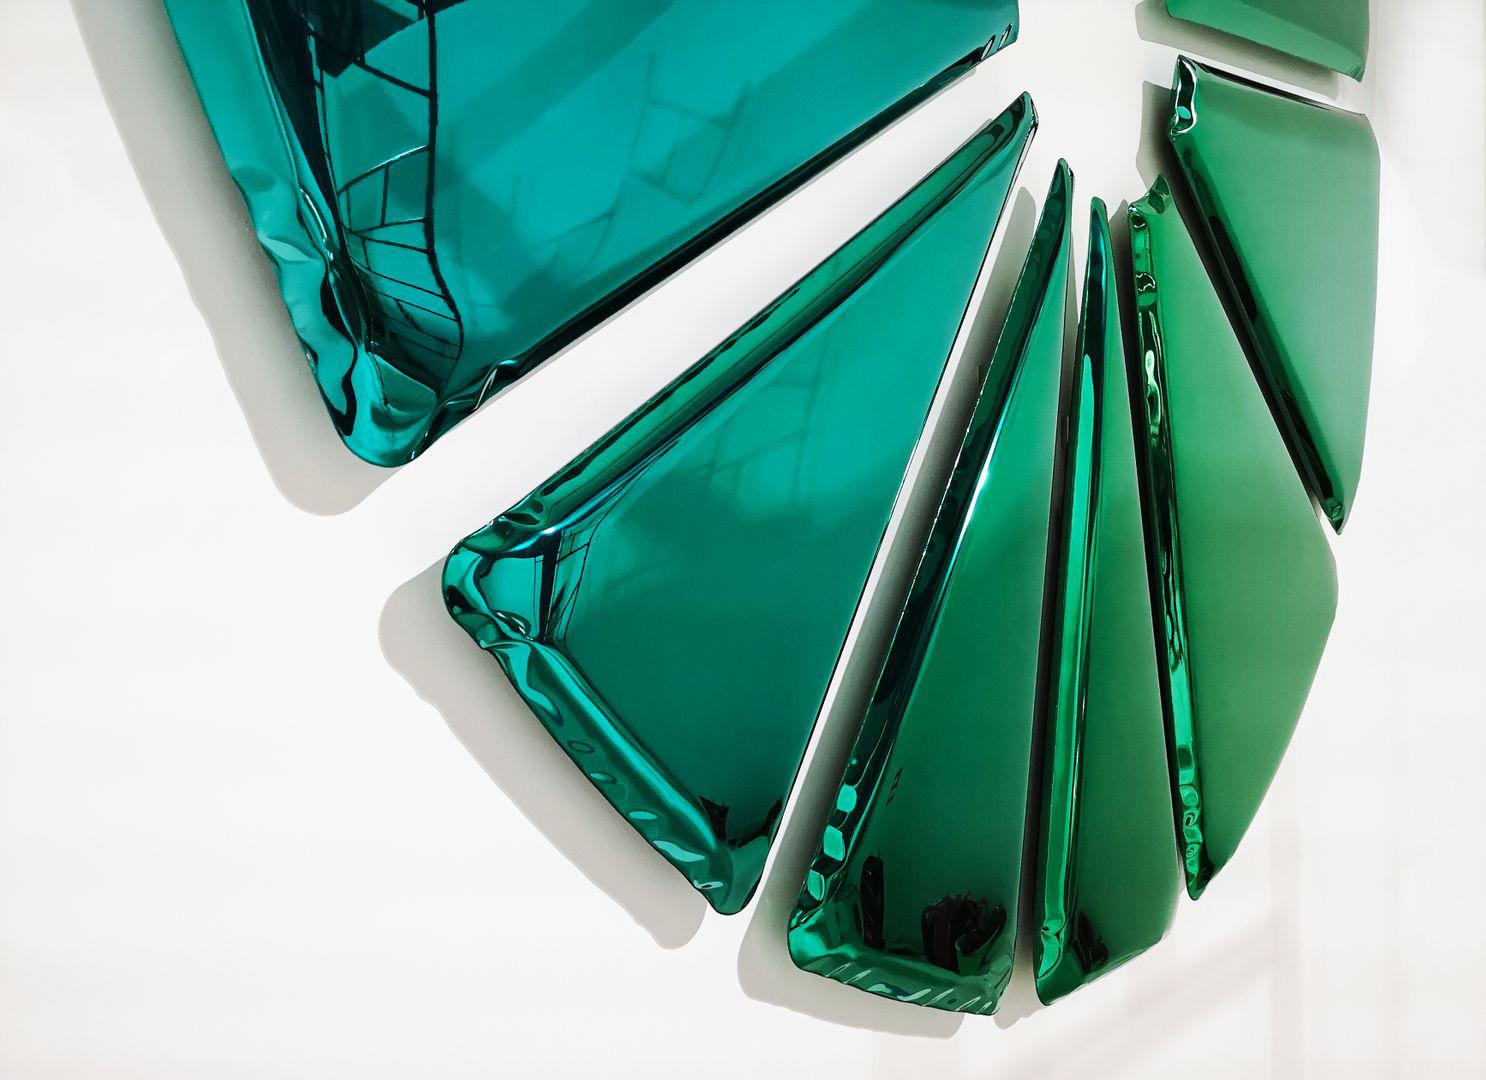 Oskar Zieta’s latest creation, the multi-element nucleus mirror brings to mind an art installation rather than a mirror. It consists of several elements made of polished stainless steel covered with a color coating,
which creates a gradient